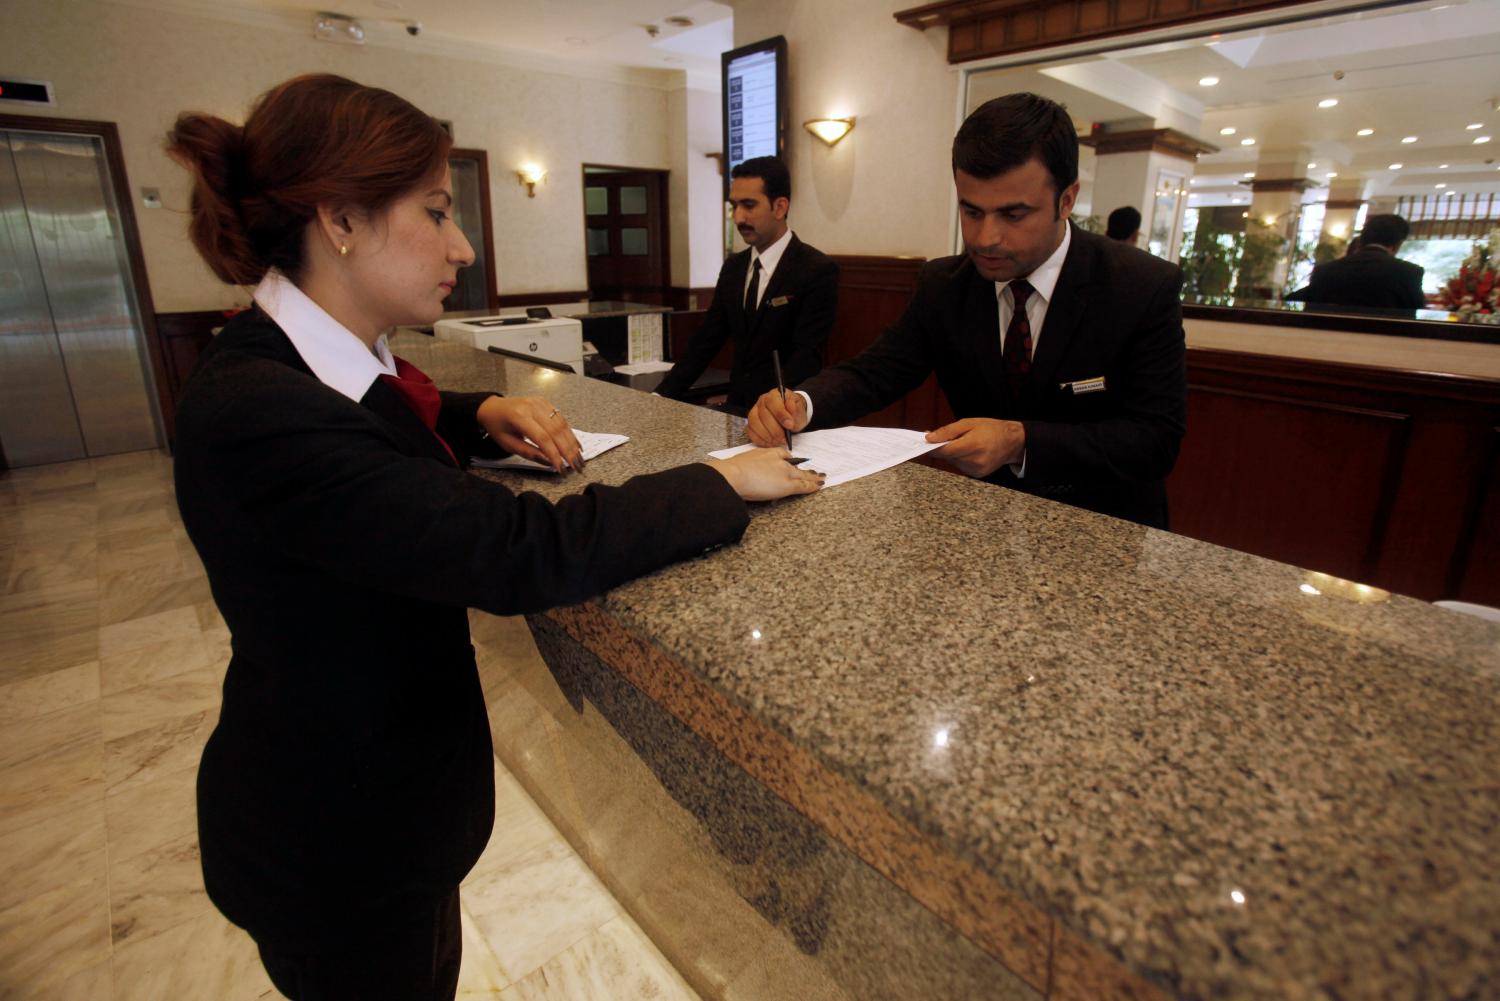 The reception desk staff is seen at the Pearl Continental hotel in Peshawar, Pakistan April 10, 2018. REUTERS/Fayaz Aziz